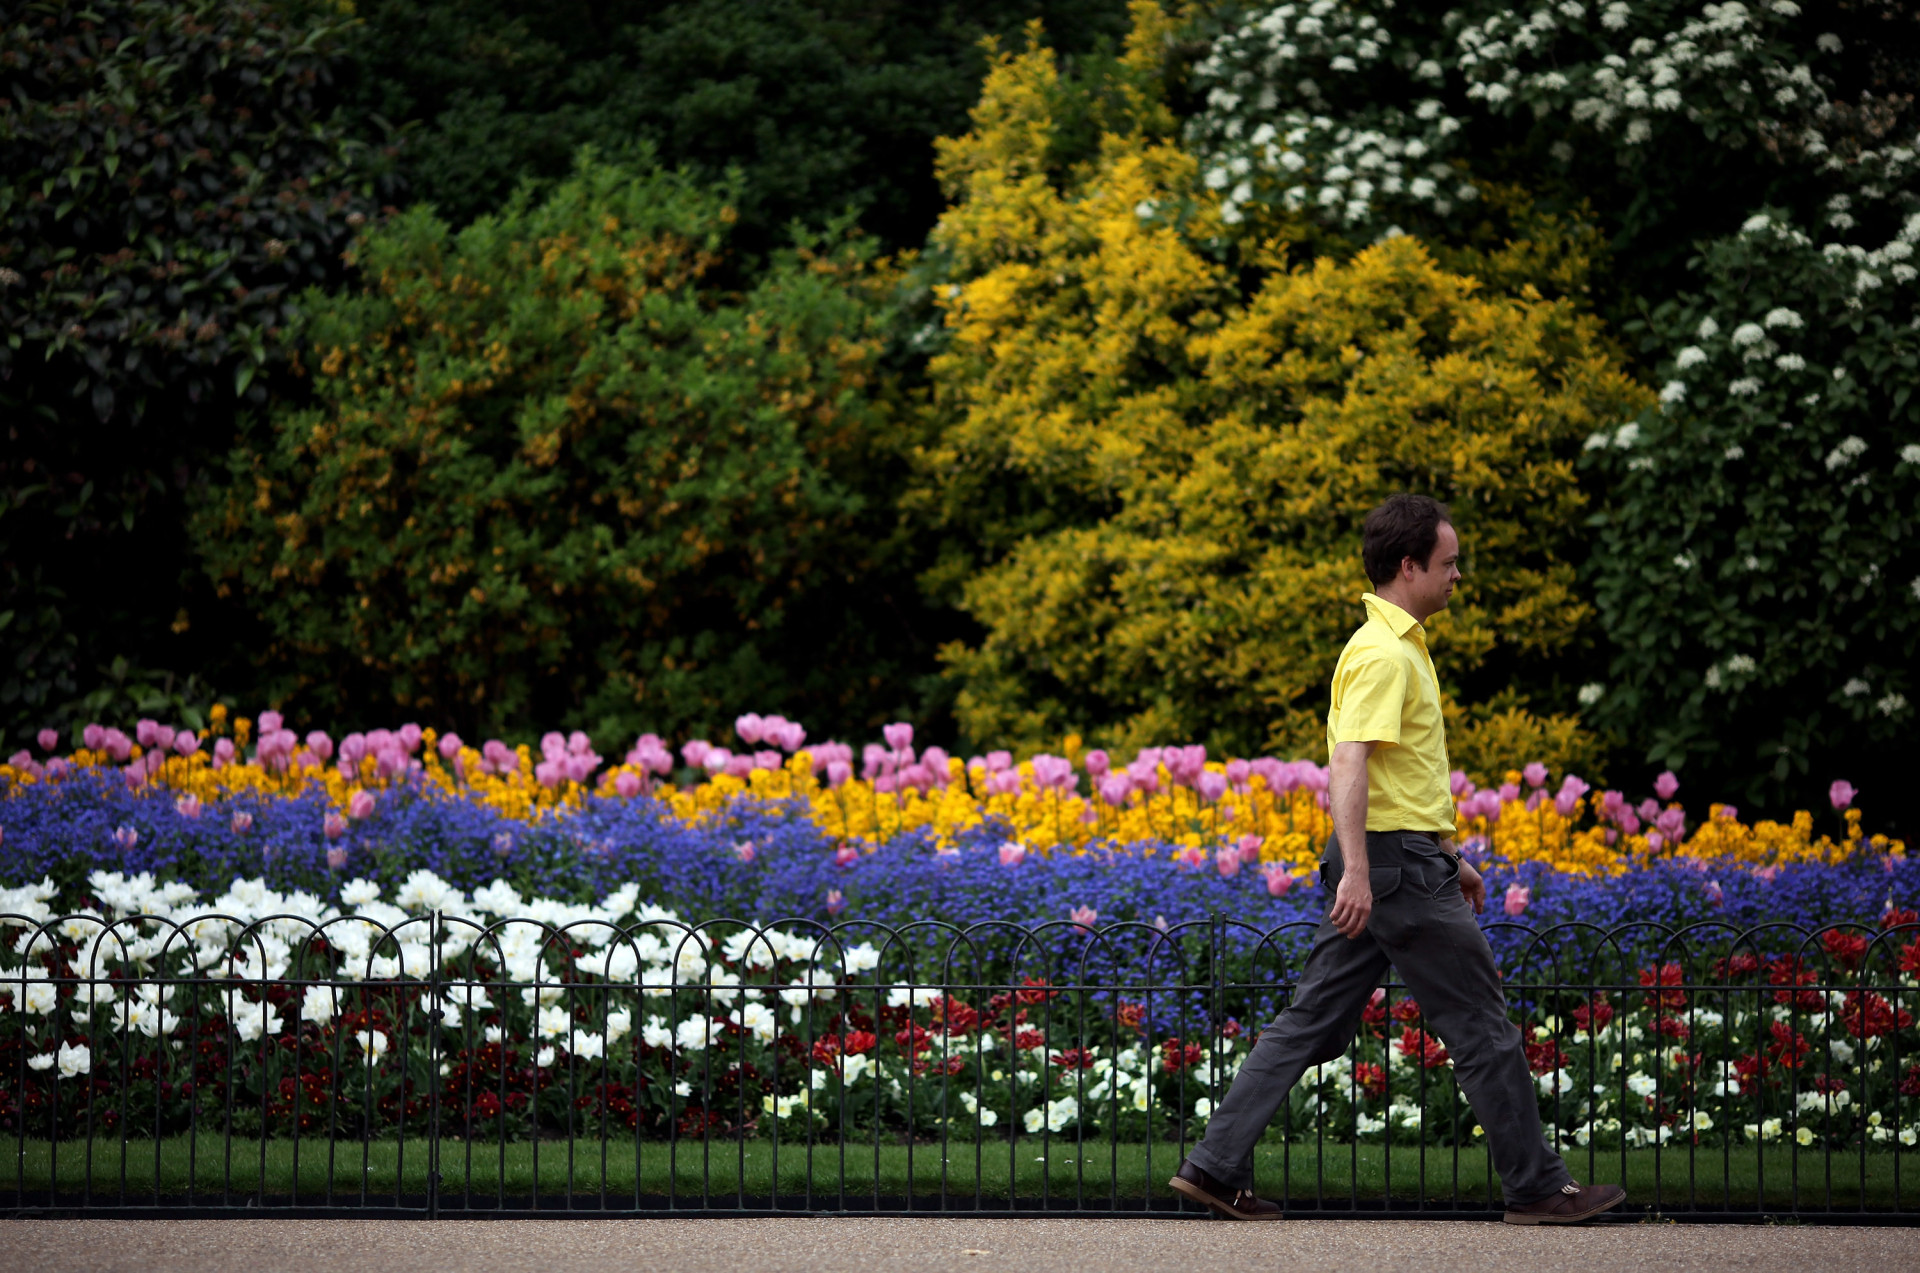 A colourful bed of flowers next to a path in St James' Park, London.<p><a href="https://www.msn.com/en-us/community/channel/vid-7xx8mnucu55yw63we9va2gwr7uihbxwc68fxqp25x6tg4ftibpra?cvid=94631541bc0f4f89bfd59158d696ad7e">Follow us and access great exclusive content every day</a></p>